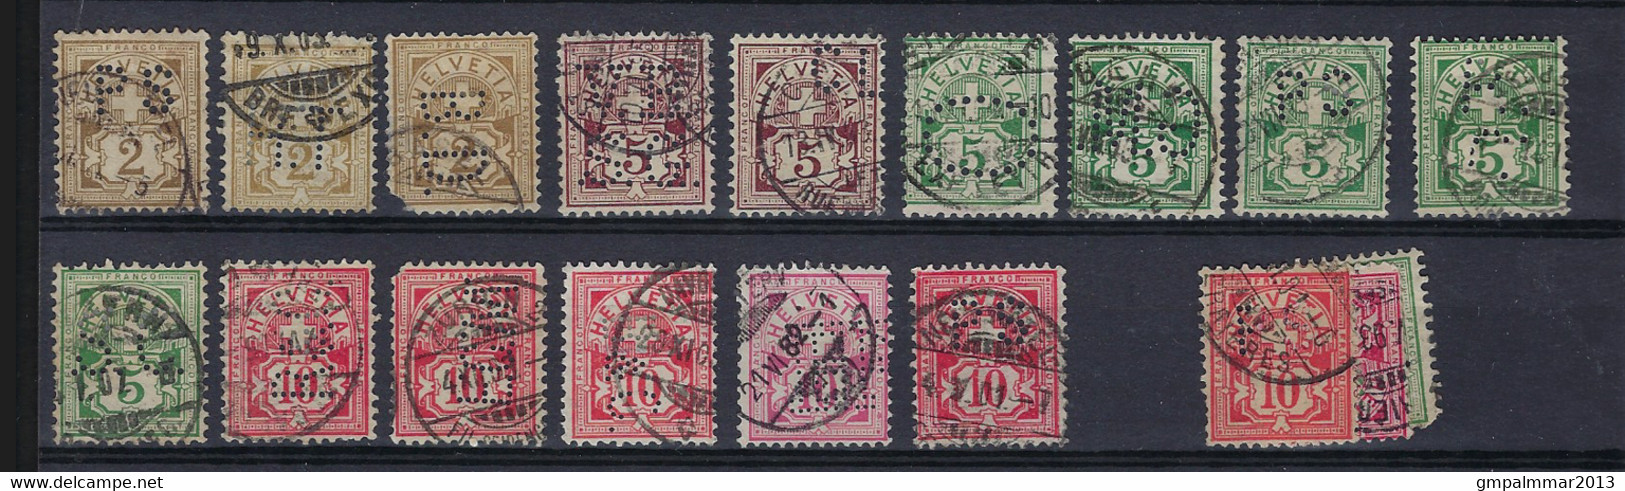 PERFIN / PERFO Suisse  /  Switzerland  1883   15  Stamps All Different Combinations ; Details See 2 Scans ! LOT 105 - Perfin